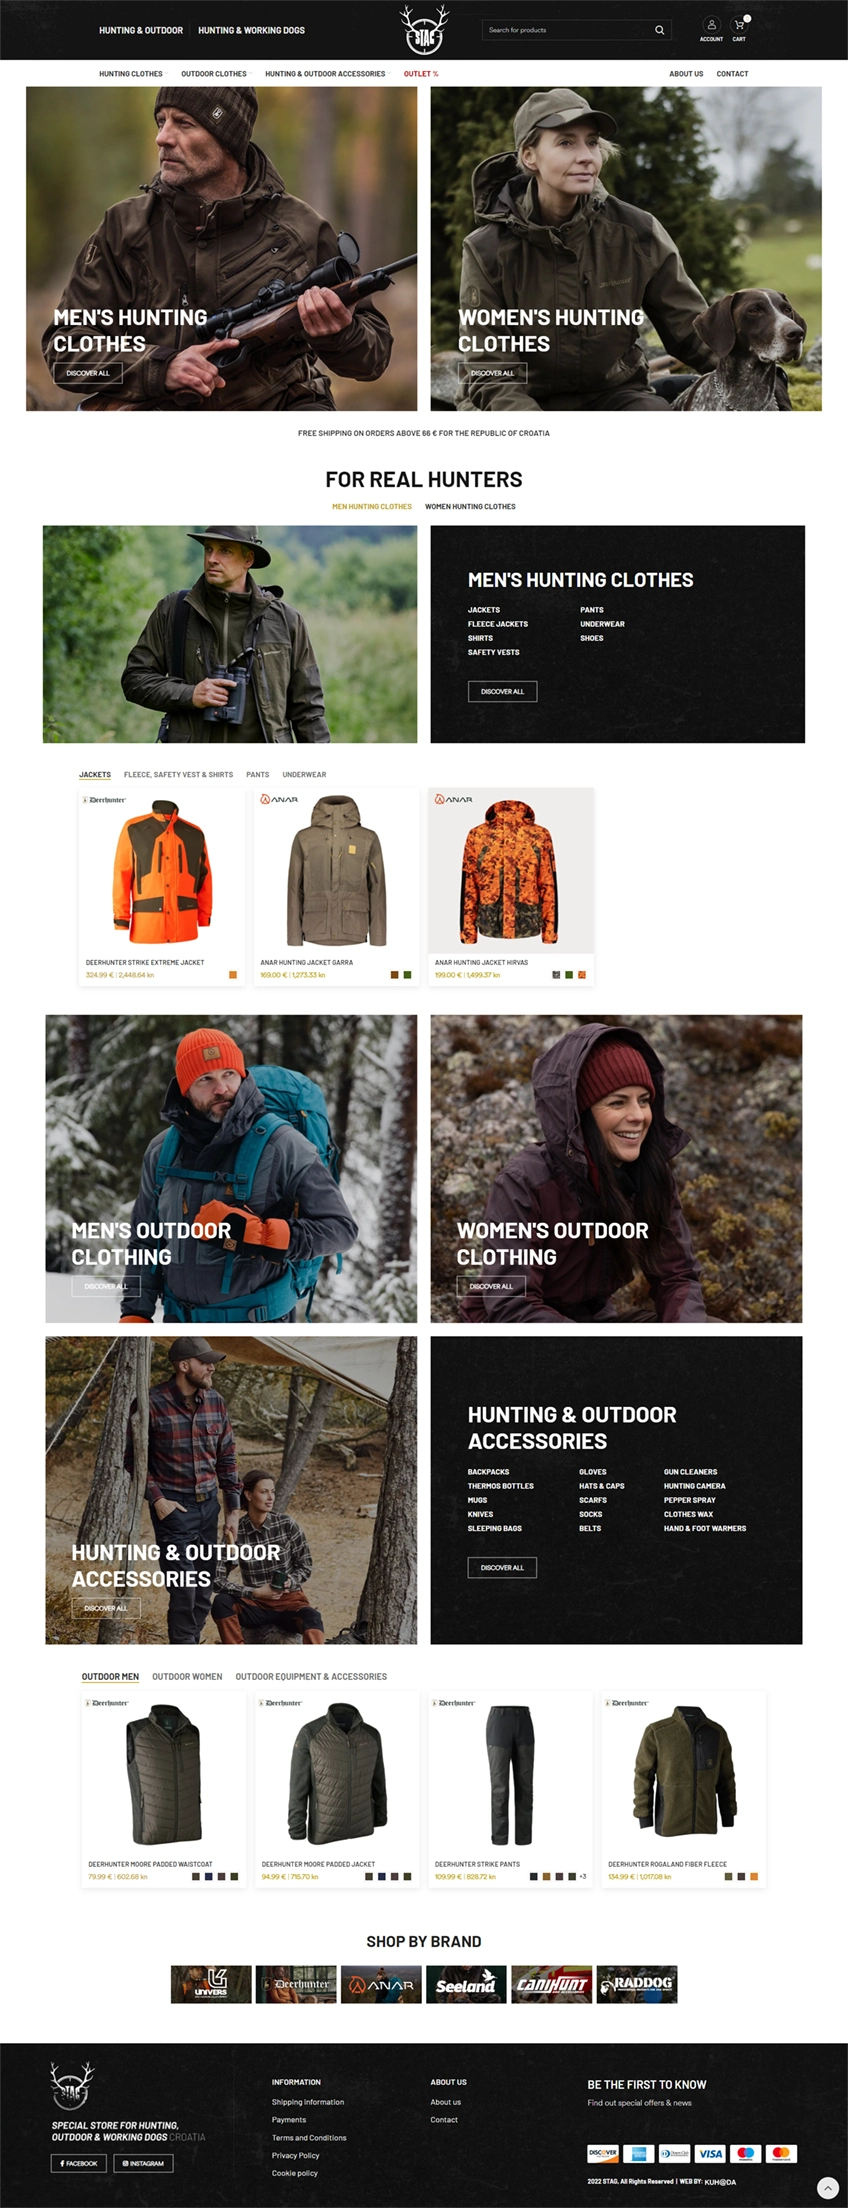 kuhada webdesign stag hr hunting outdoor clothes and accessories 2023 01 27 13 02 16 copy